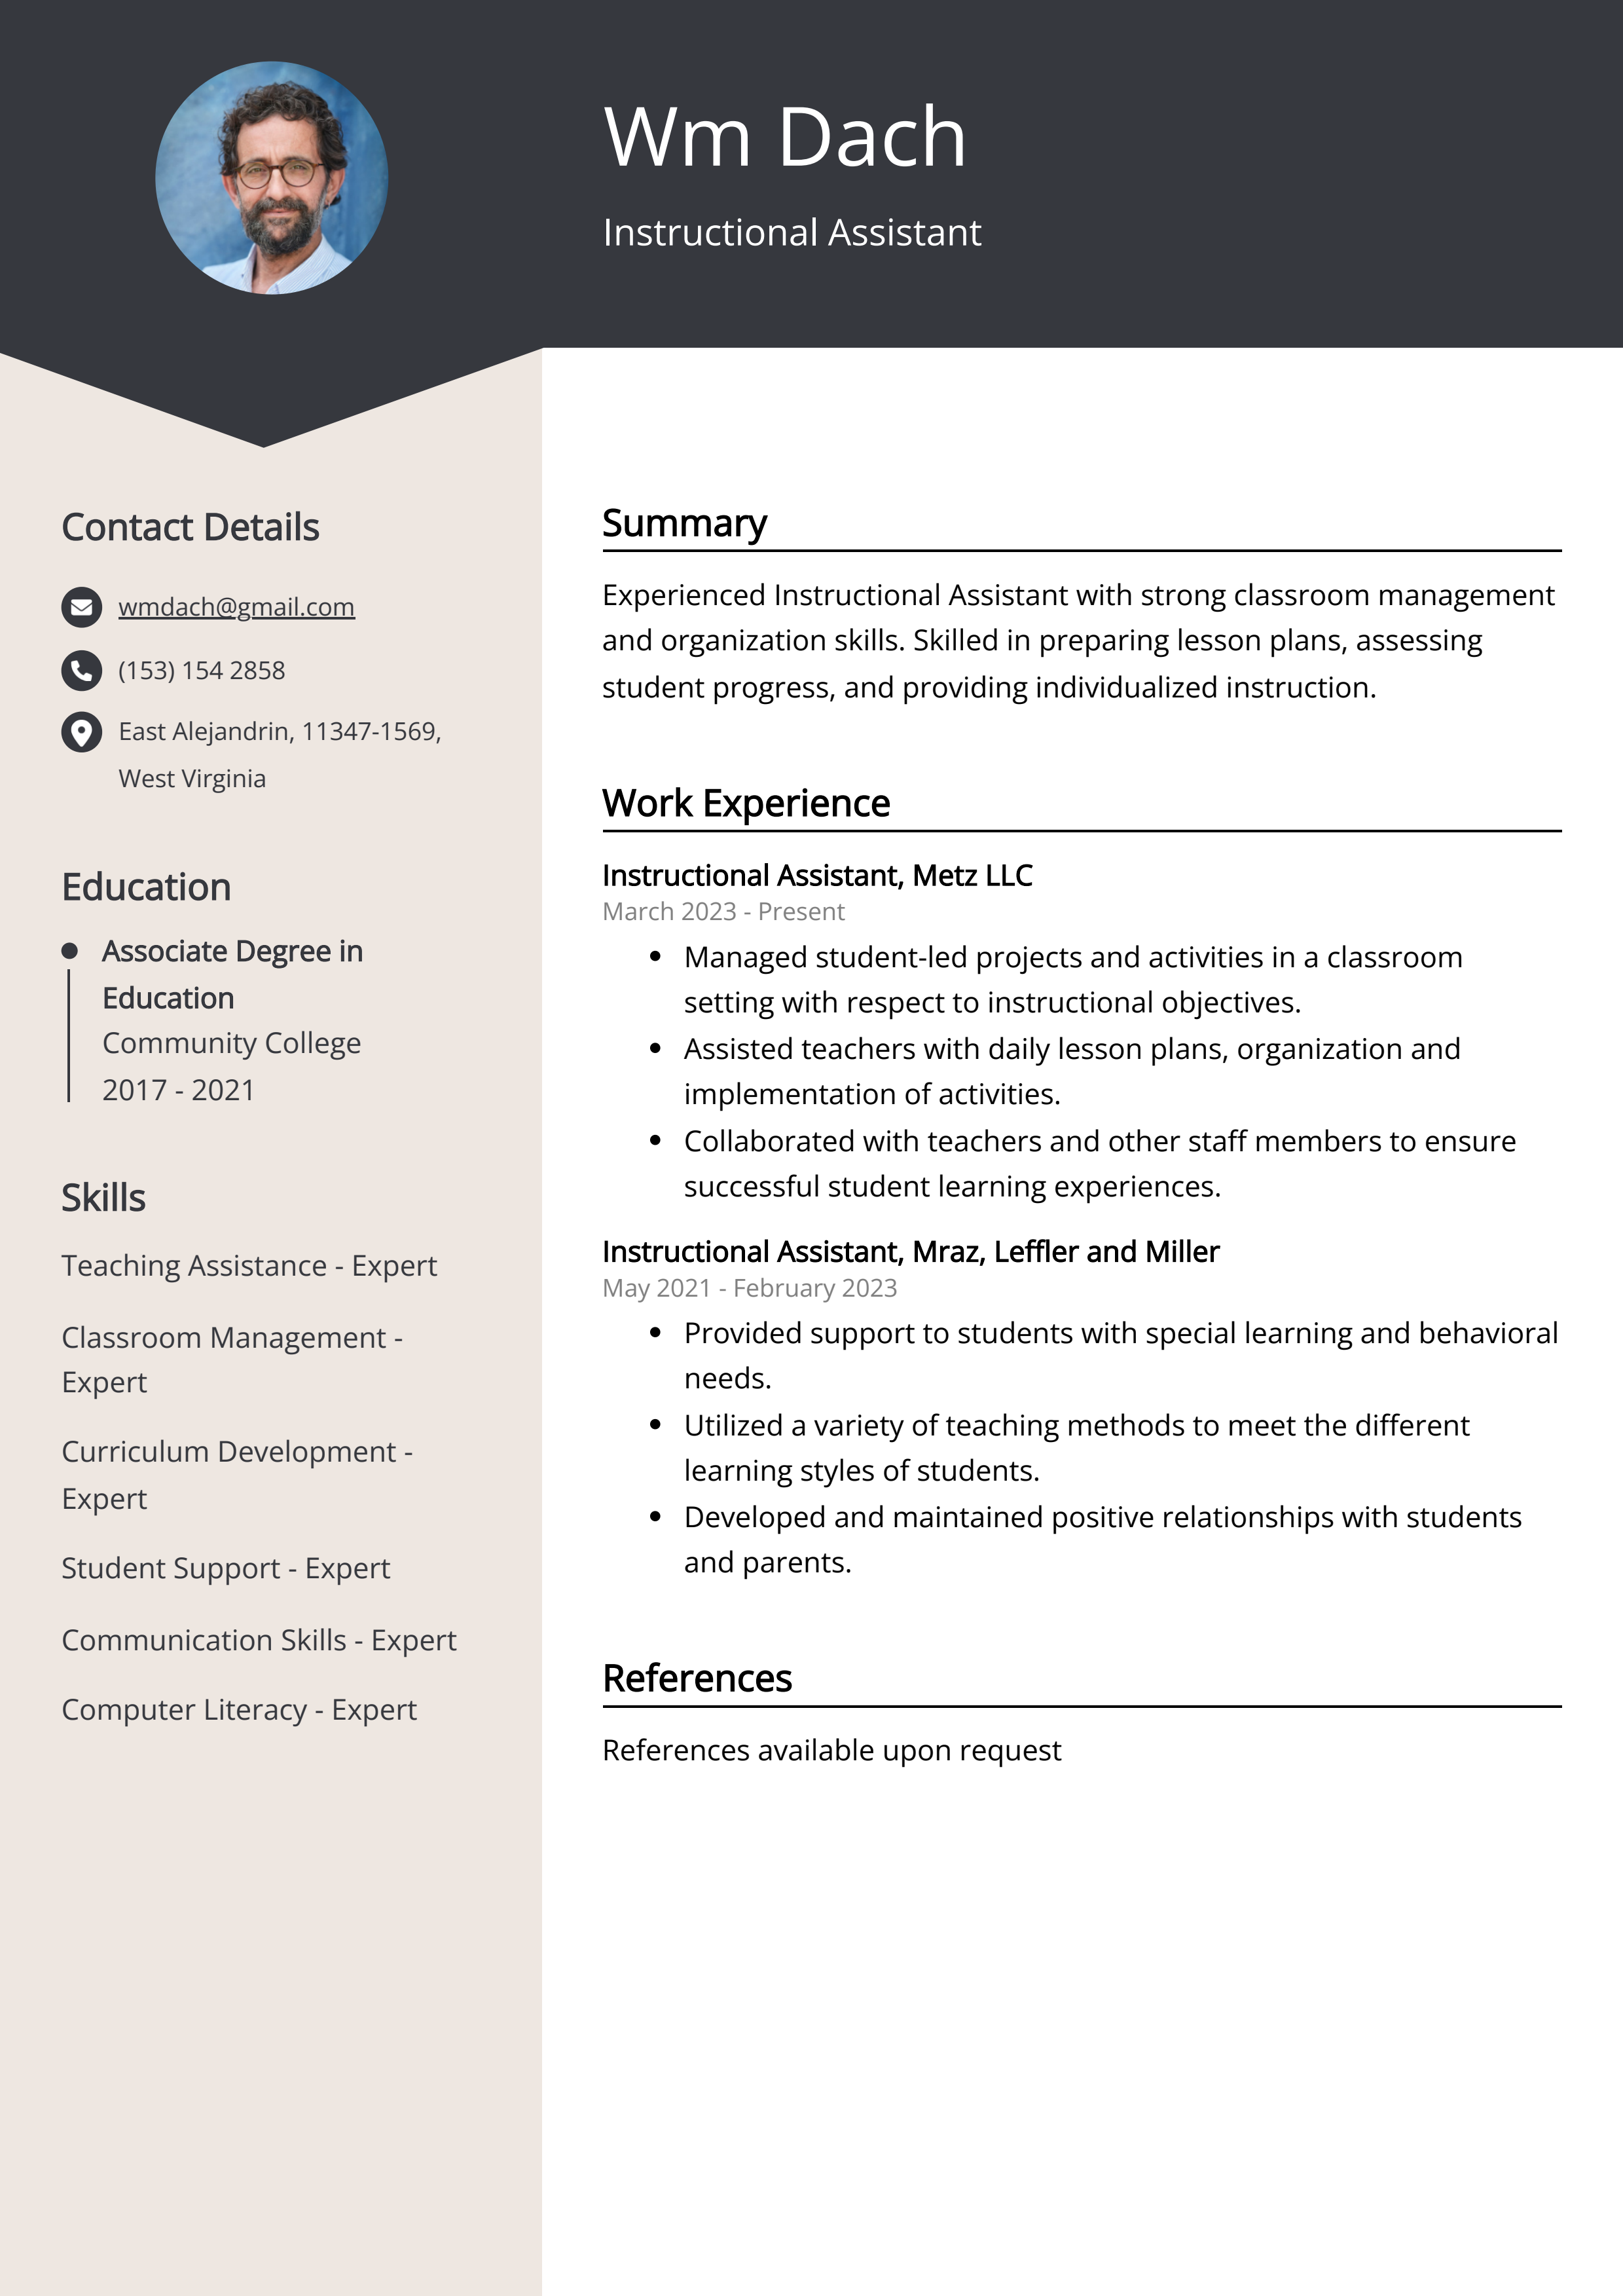 Instructional Assistant CV Example